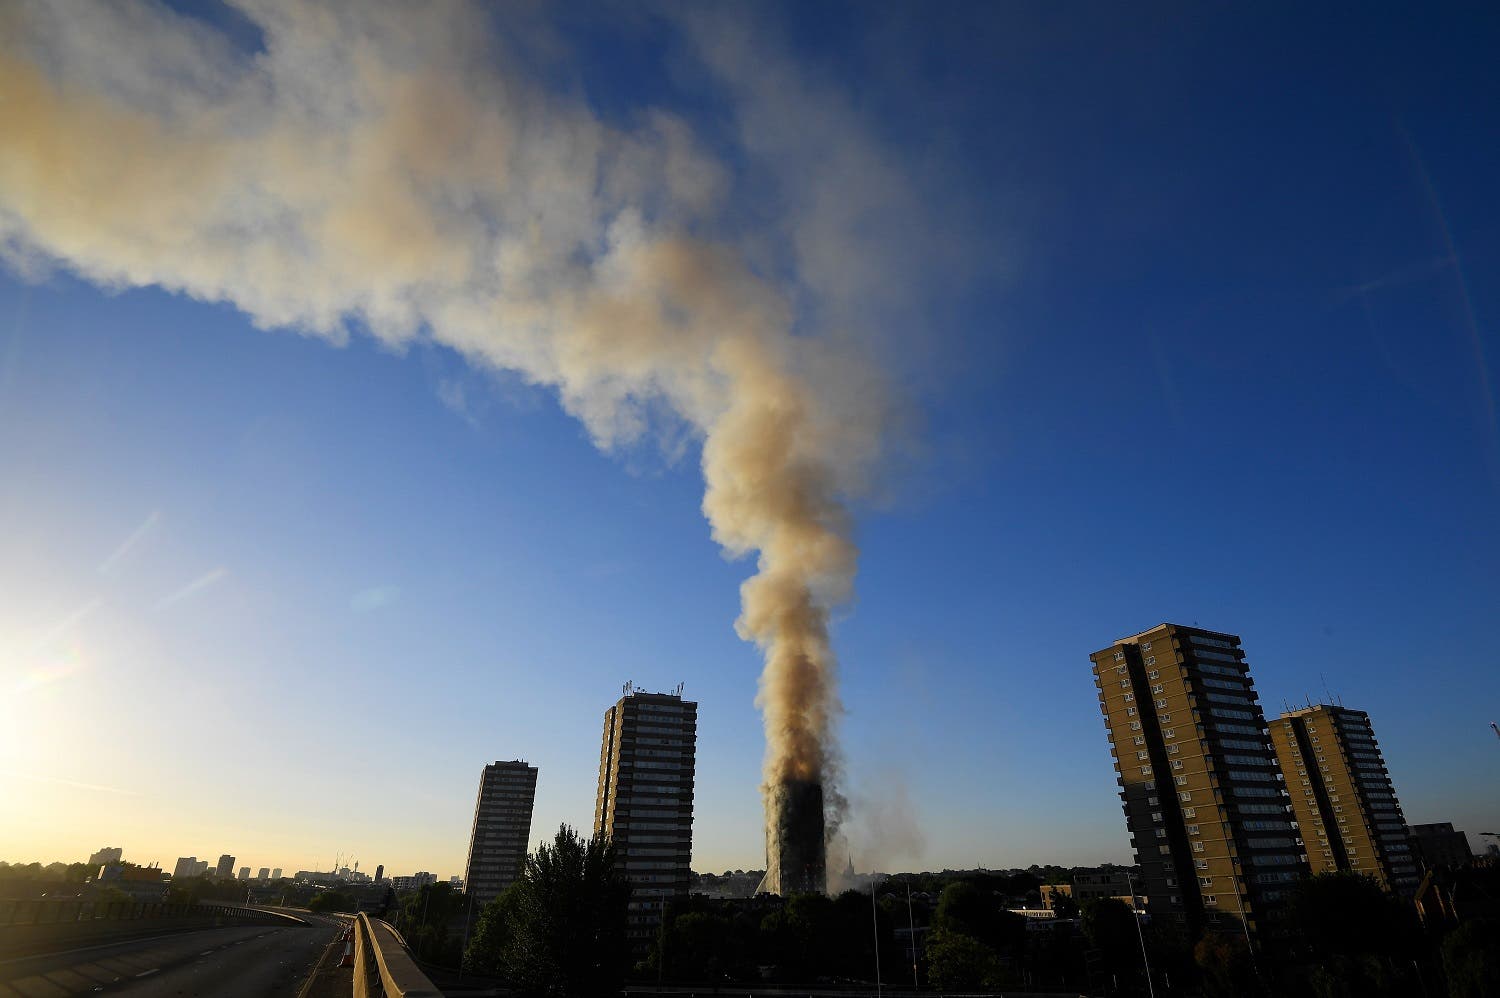 The A40 road is seen closed as flames and smoke billow as firefighters deal with a serious fire in a tower block at Latimer Road in West London, Britain June 14, 2017. (Reuters)